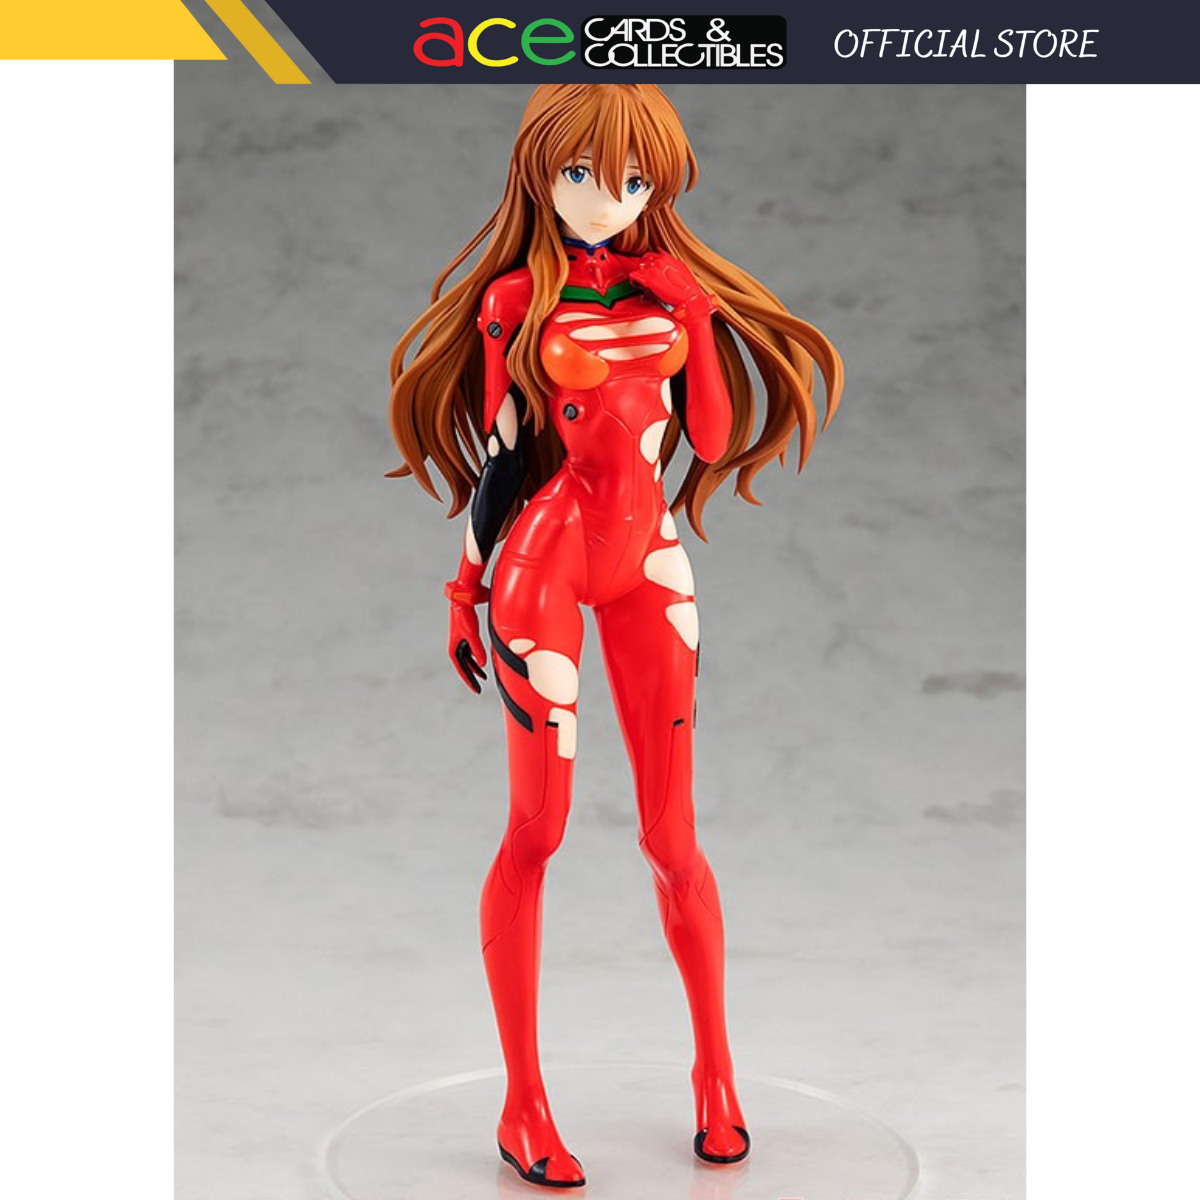 Rebuild of Evangelion Pop Up Parade "Asuka Langley"-Good Smile Company-Ace Cards & Collectibles